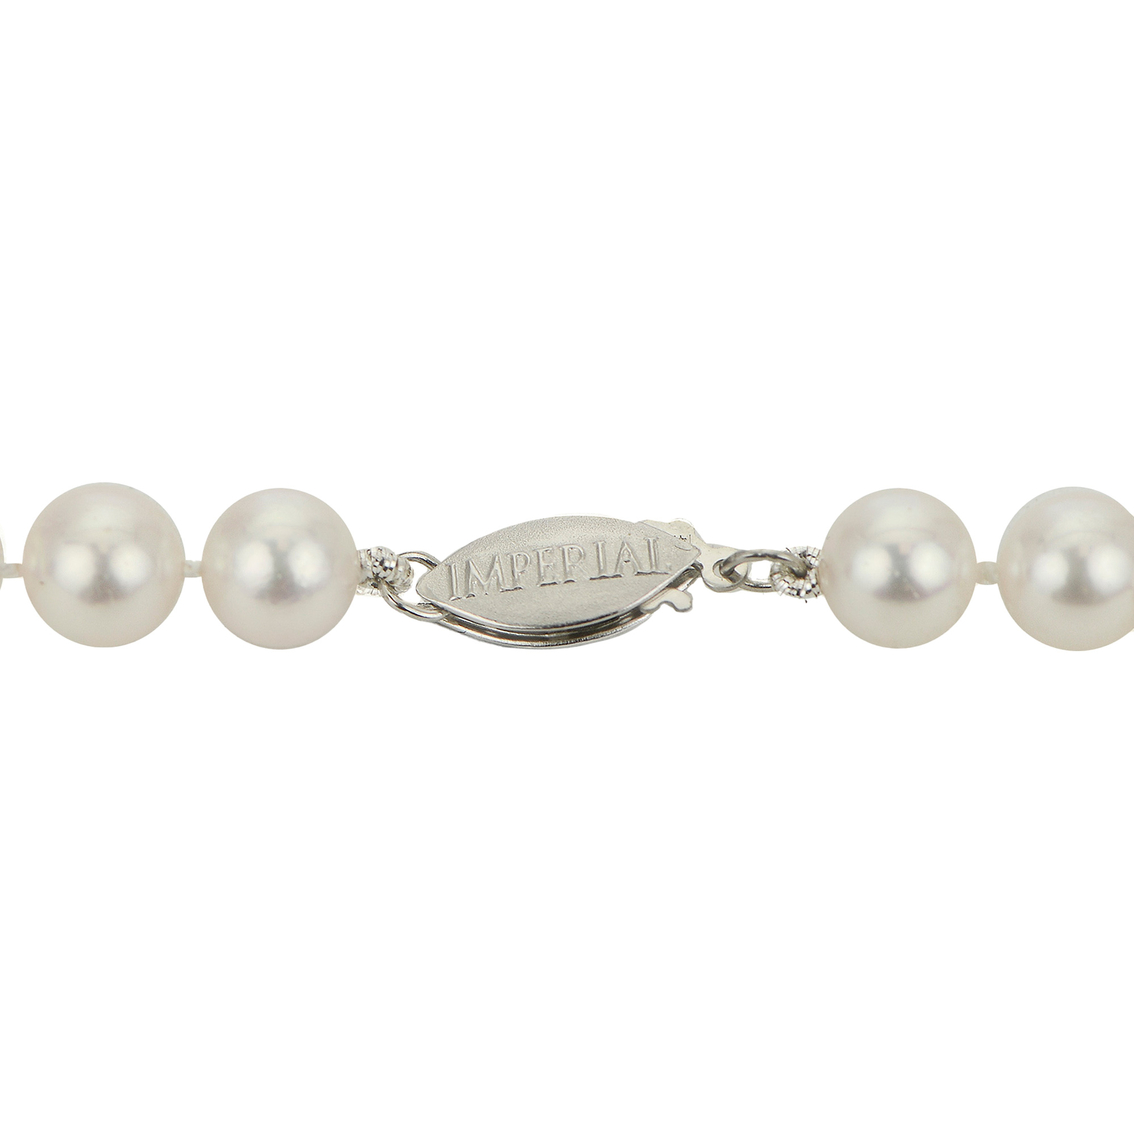 Imperial Deltah 18 in. 7-7.5mm AA Akoya Cultured Pearl Necklace - Image 2 of 2